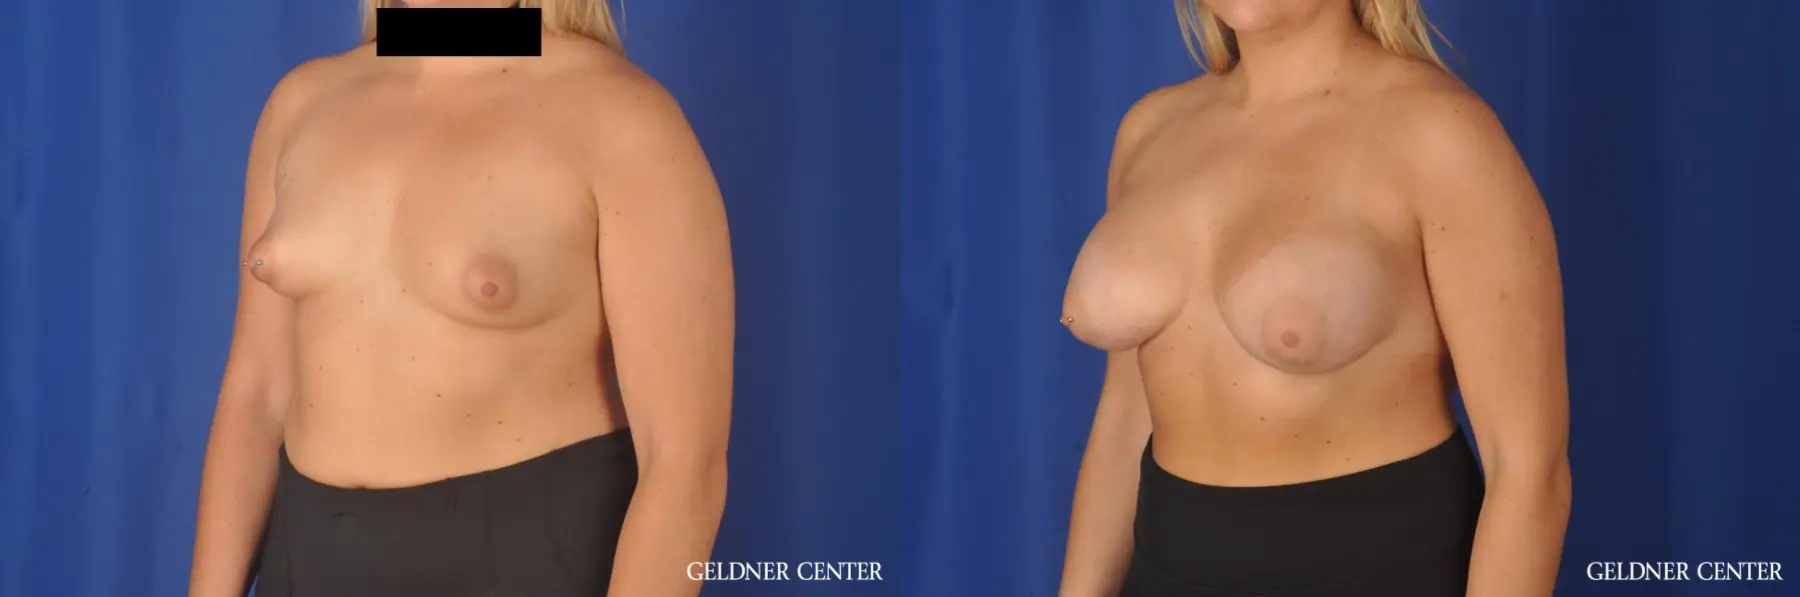 Breast Augmentation: Patient 180 - Before and After 4